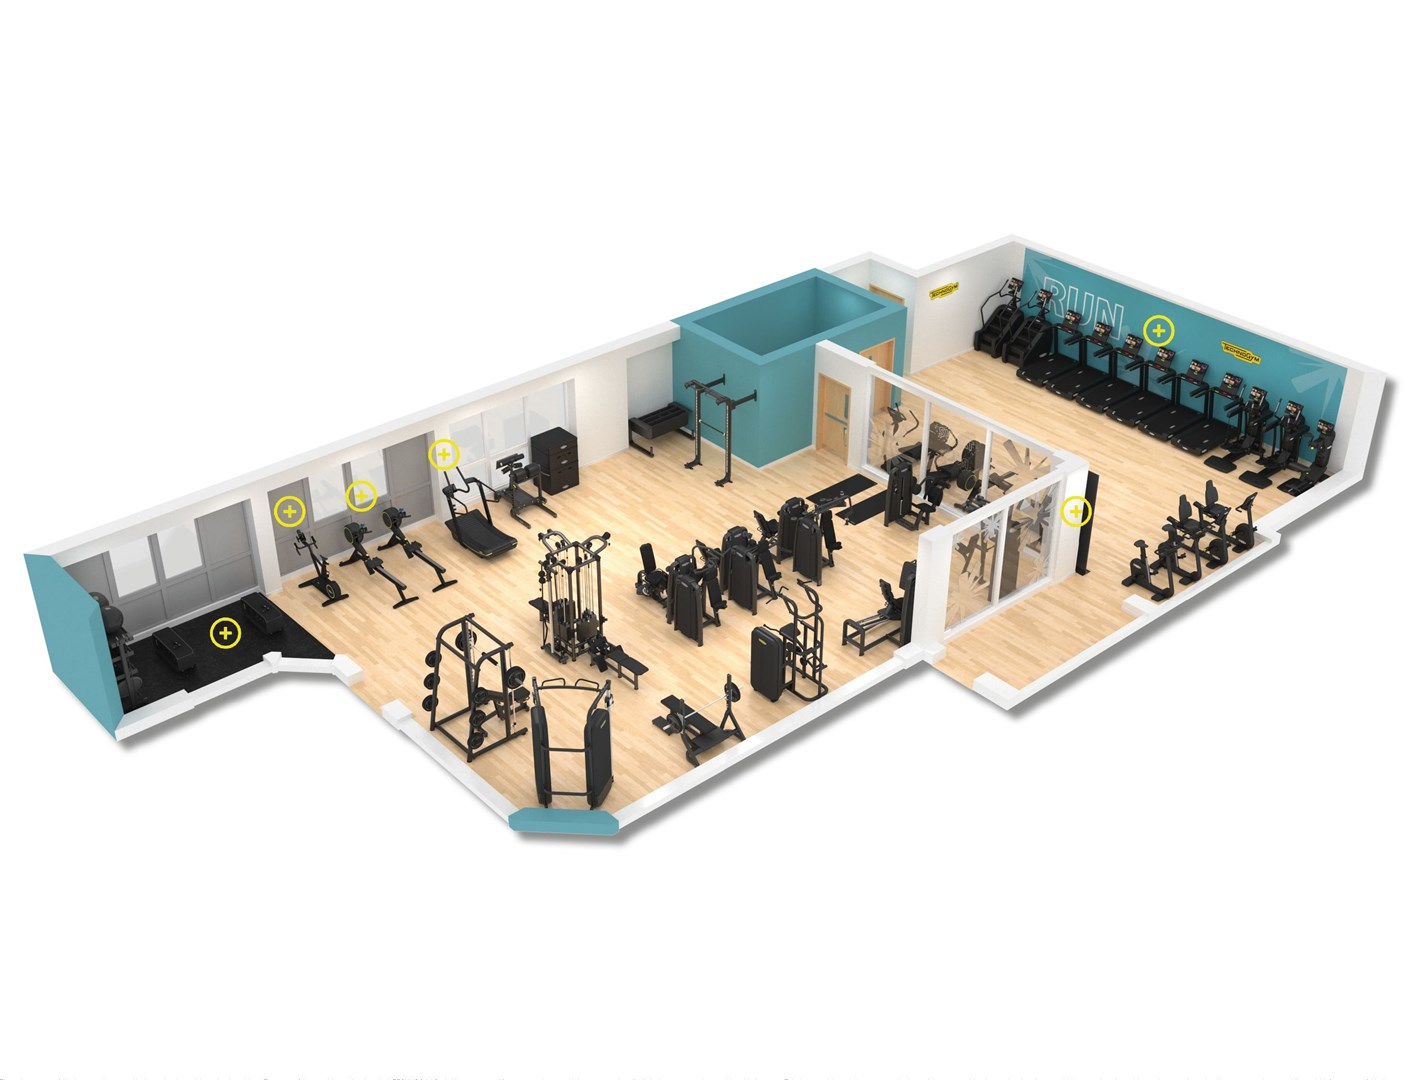 Dingwall Leisure Centre has recently upgraded its gym equipment.